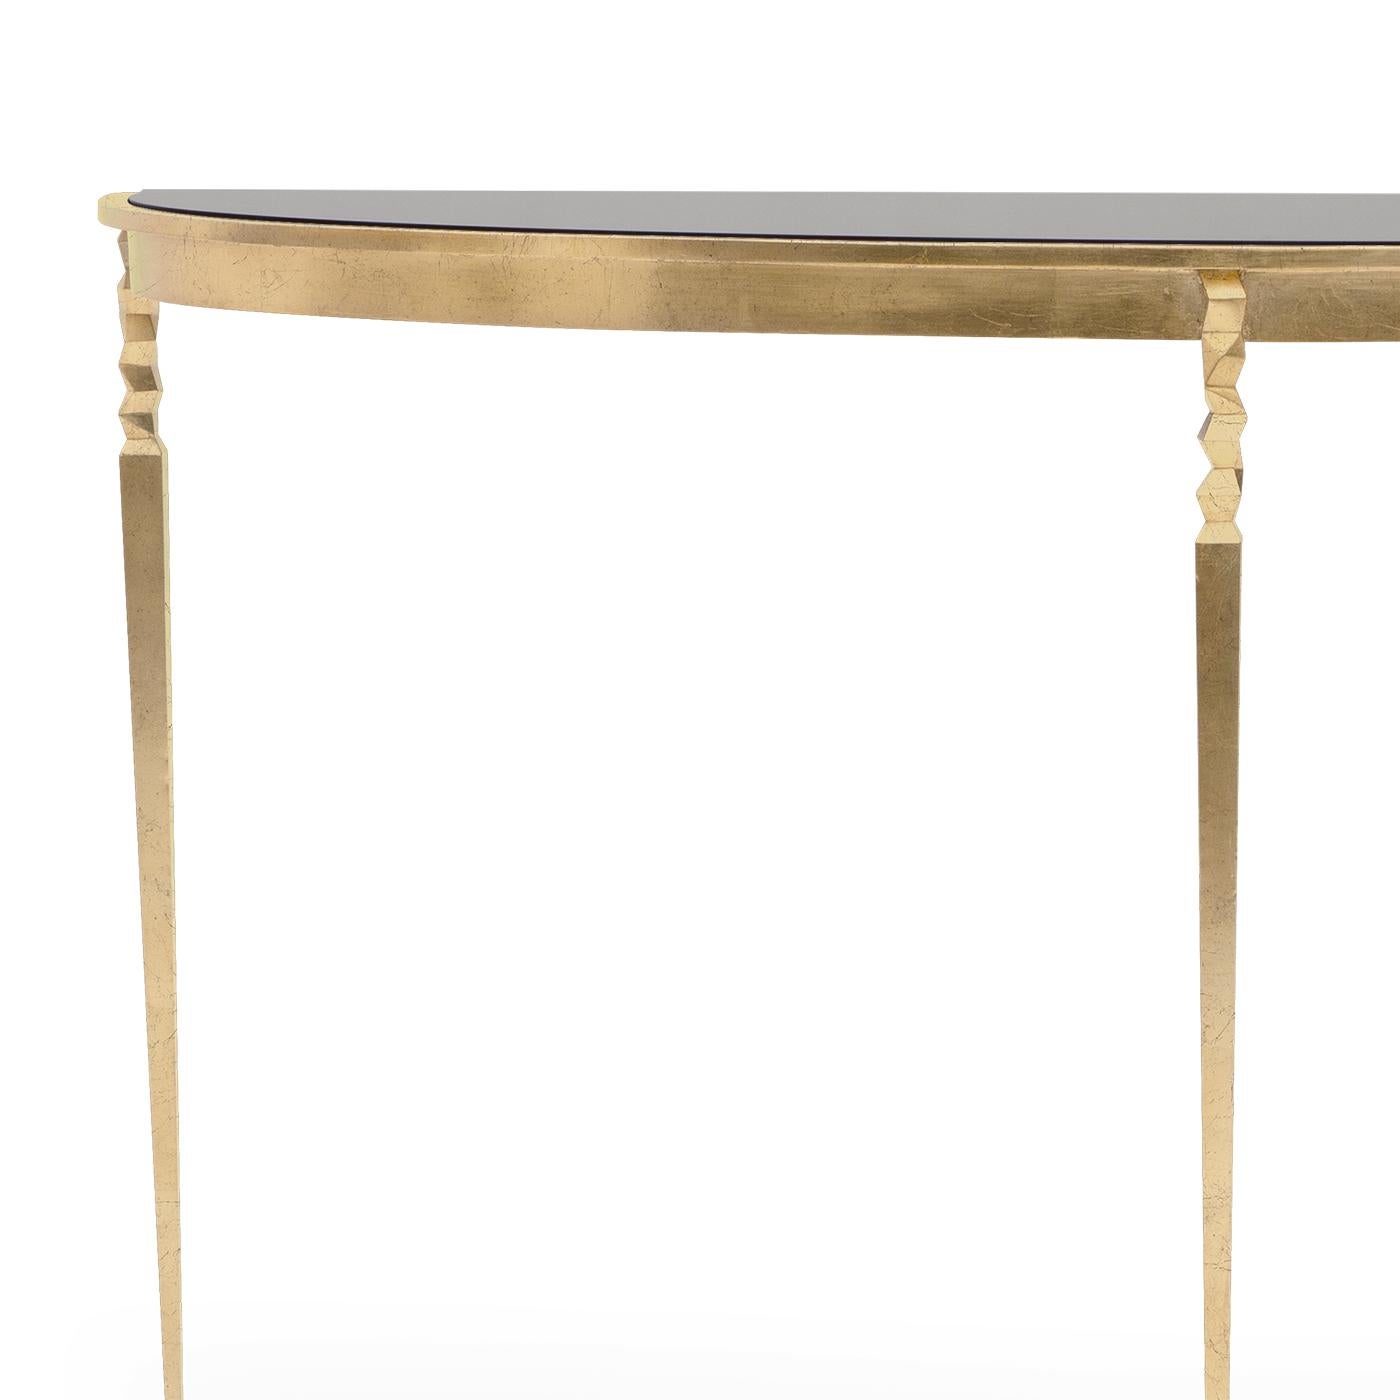 Console table finesse with solid black glass top.
On forged iron base in gold finish style oro.
Base also available in others finishes on request.